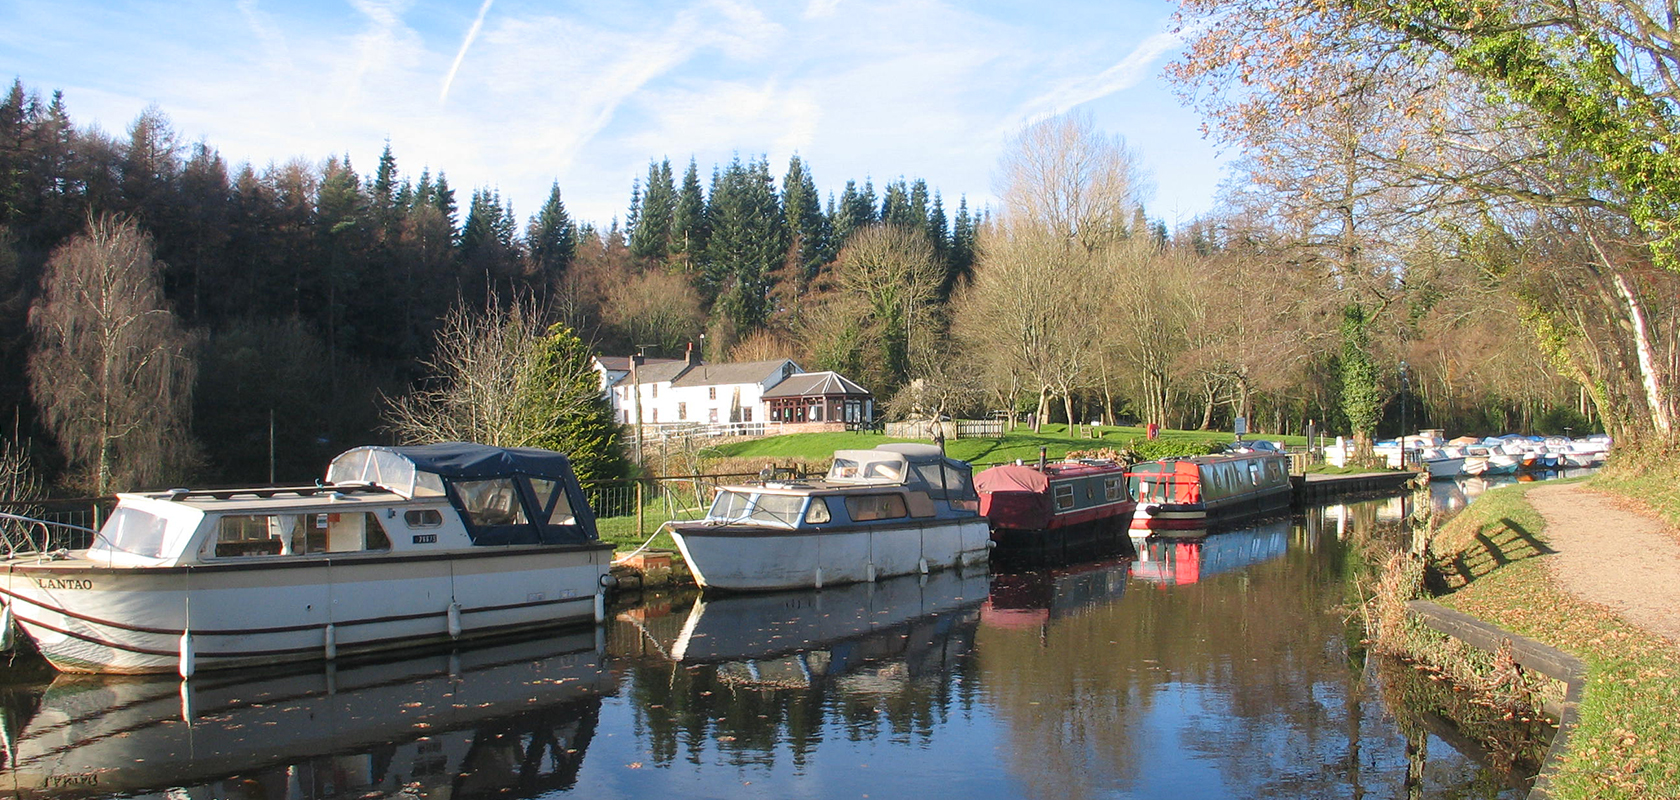 Monmouthshire and Brecon Canal